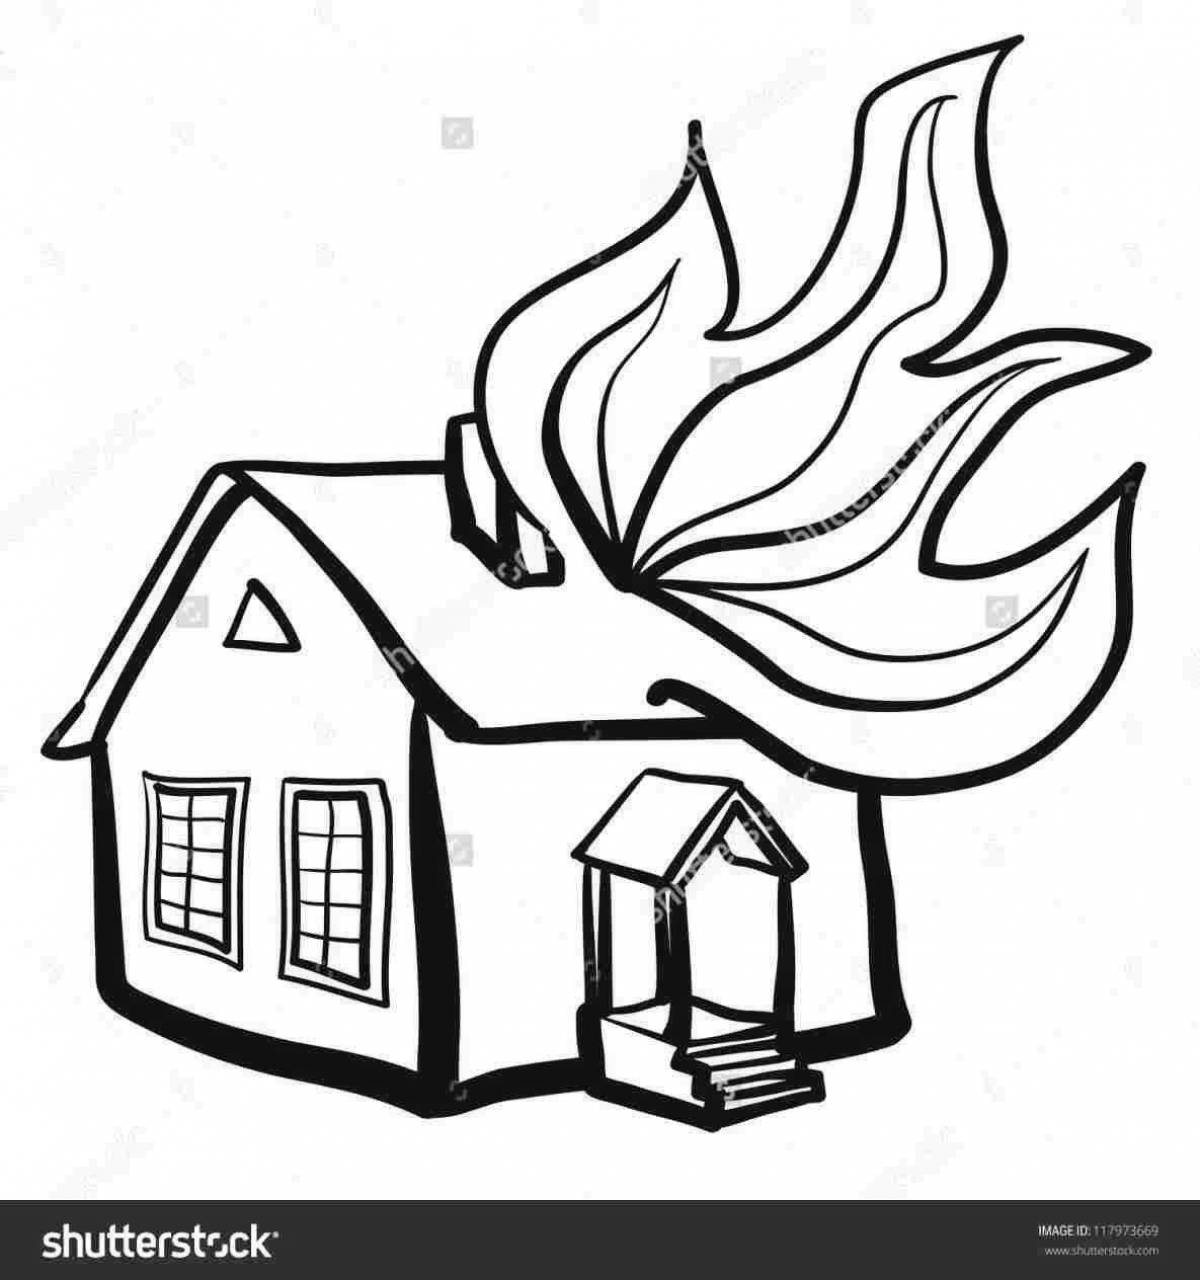 Adorable burning house coloring book for kids